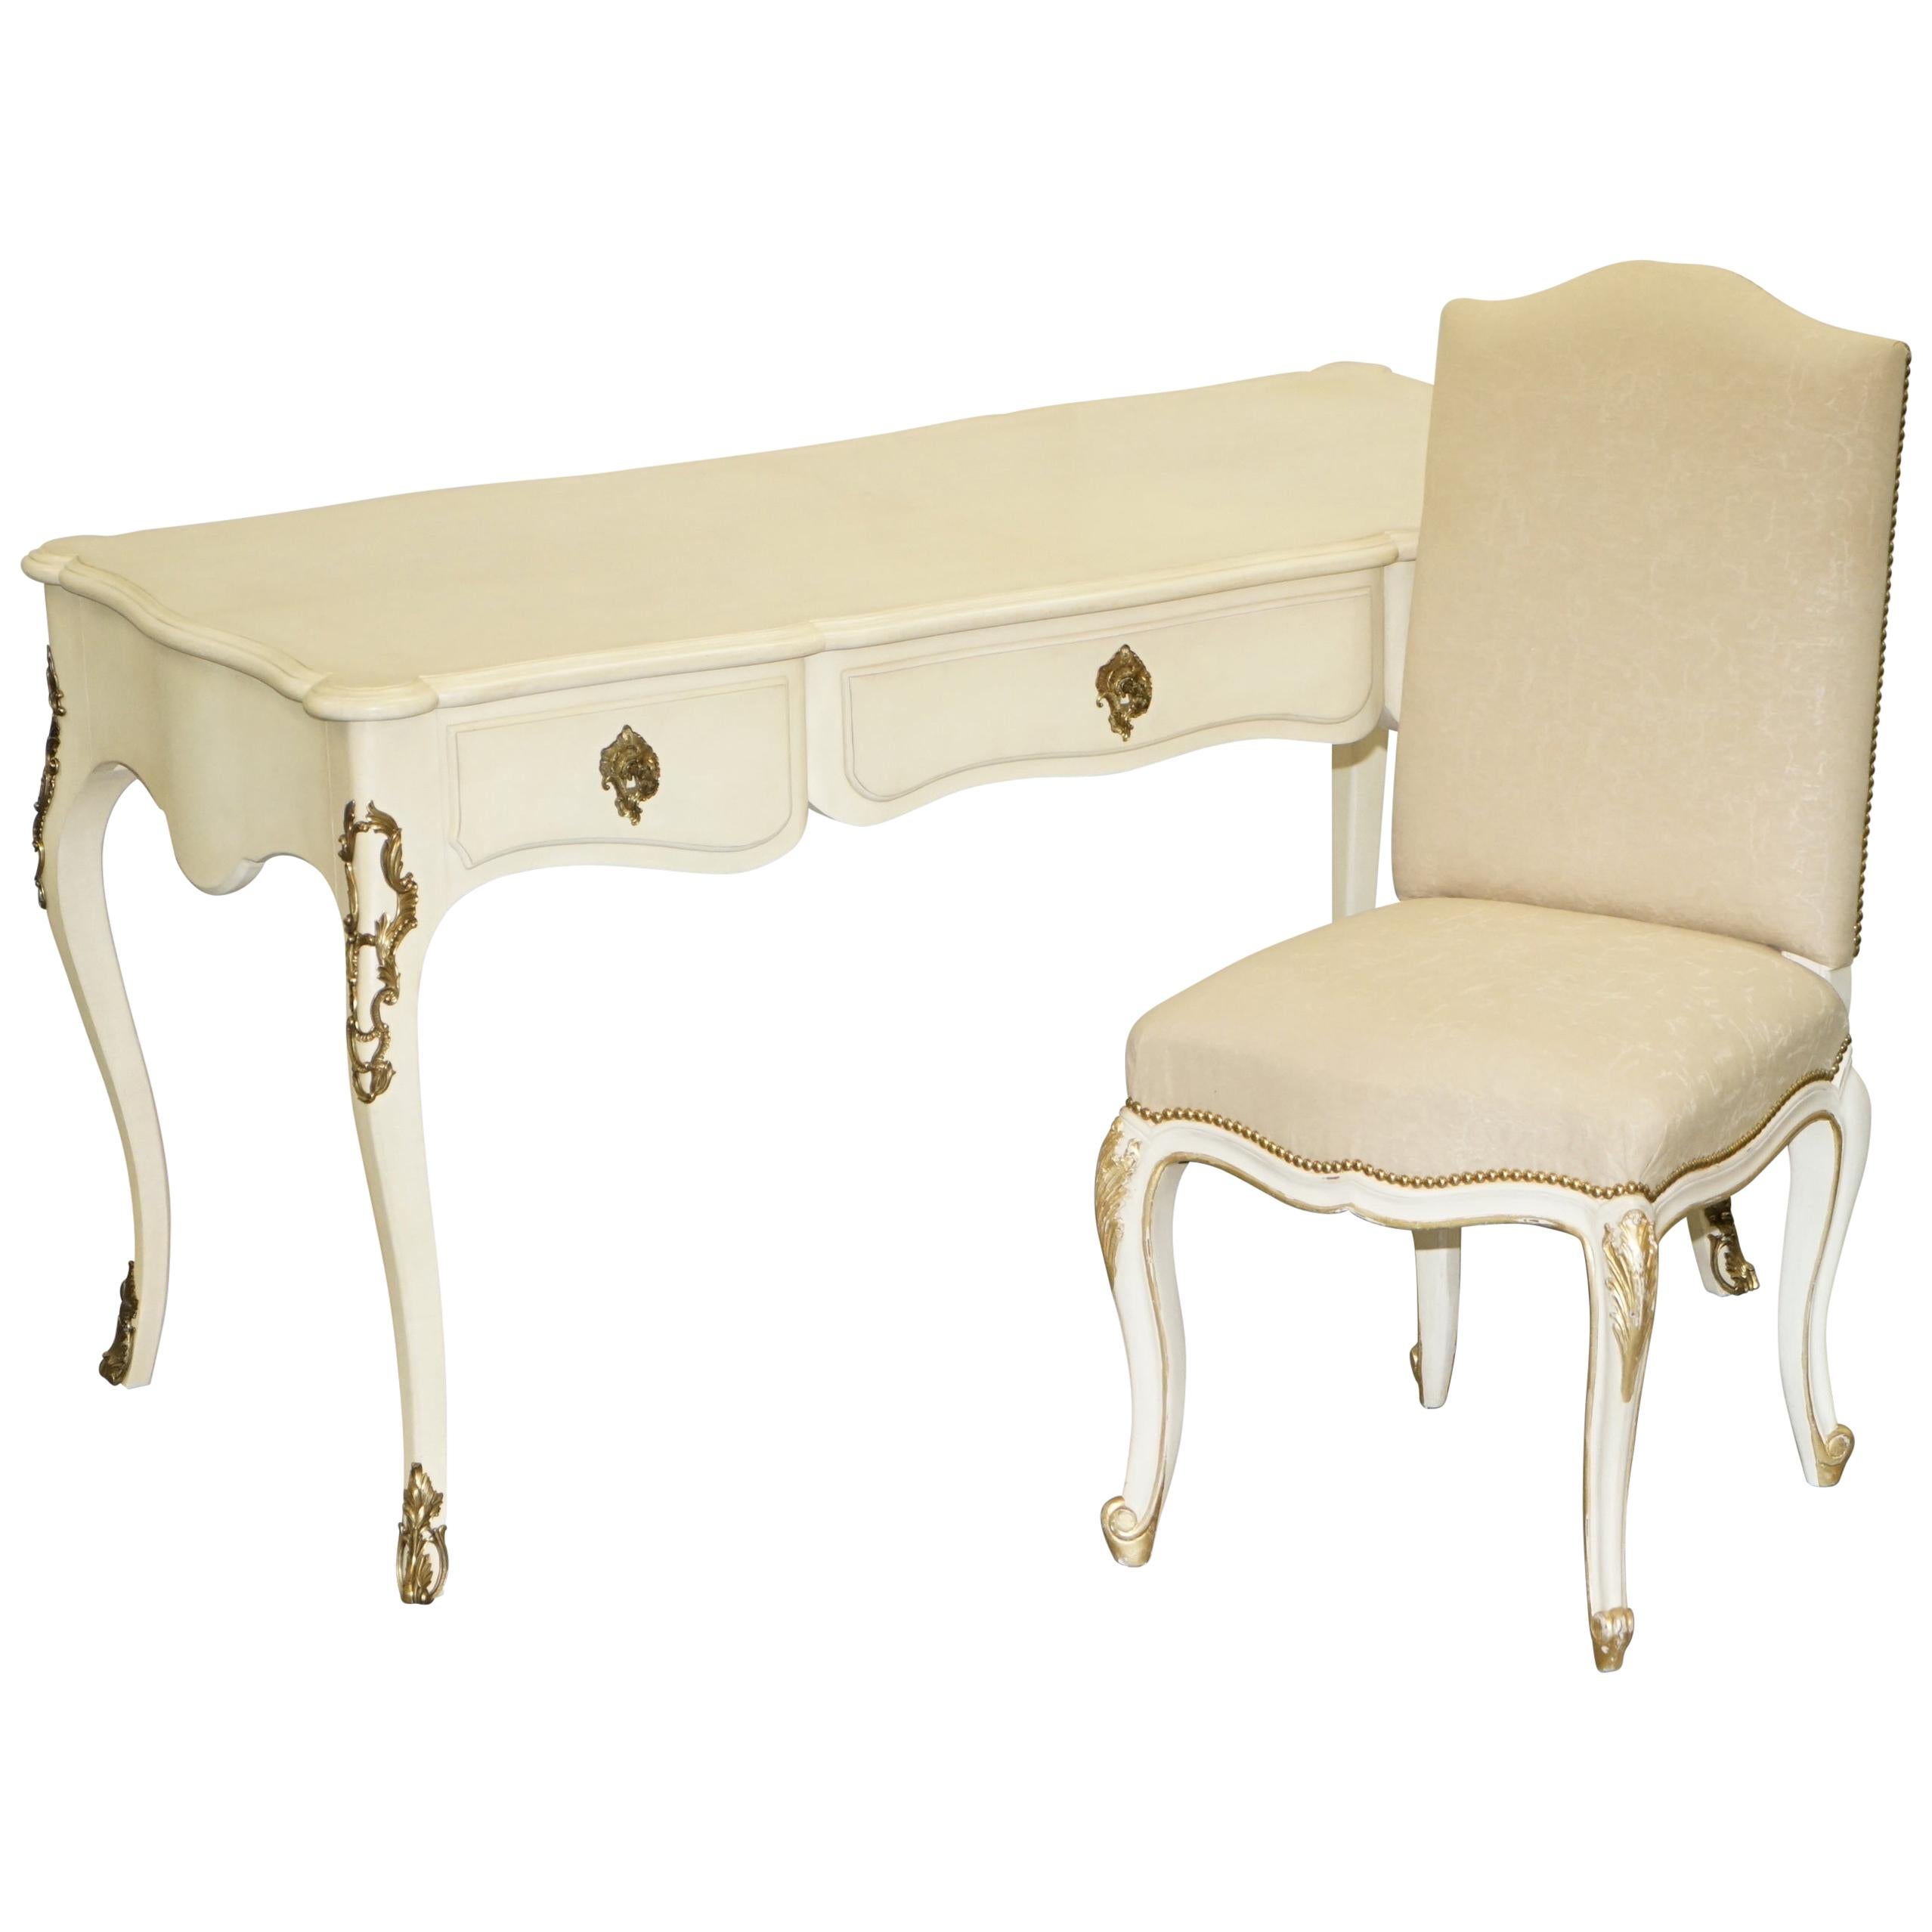 Sublime Ralph Lauren Cannes French Bureau Plat Desk and Office Chair Part  of Suite For Sale at 1stDibs